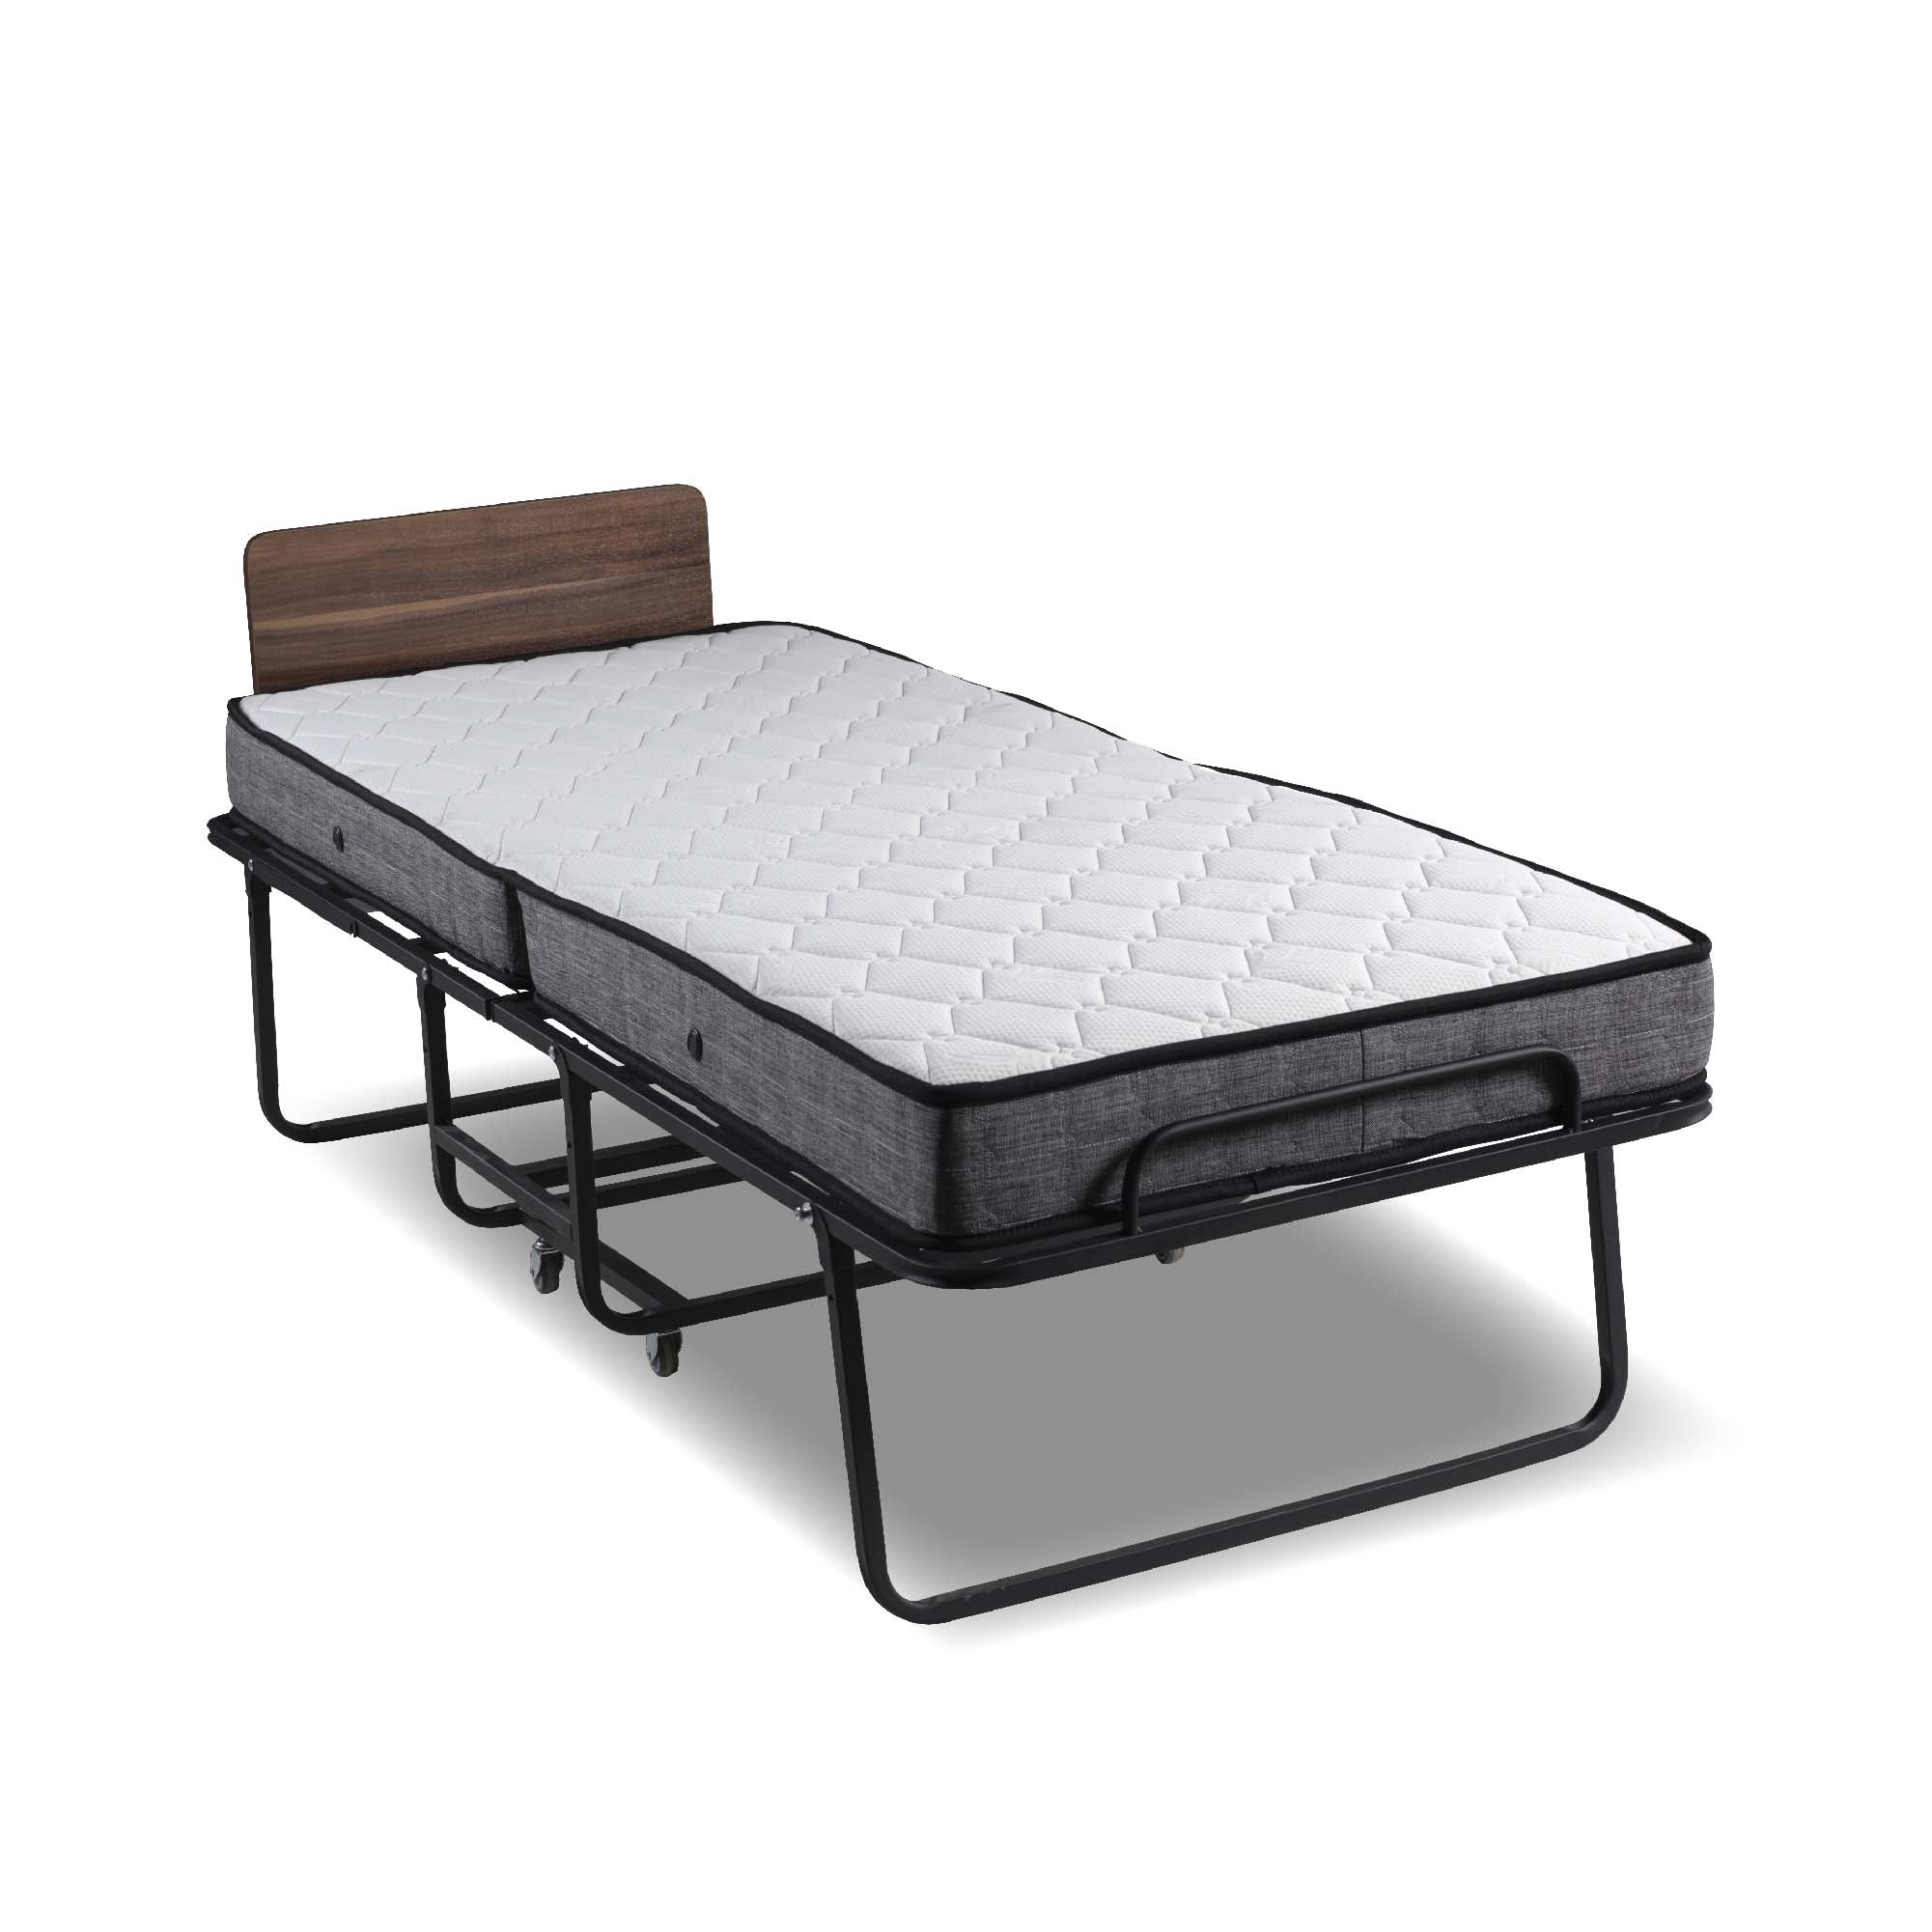 Soho Folding Bed - Home Store Furniture